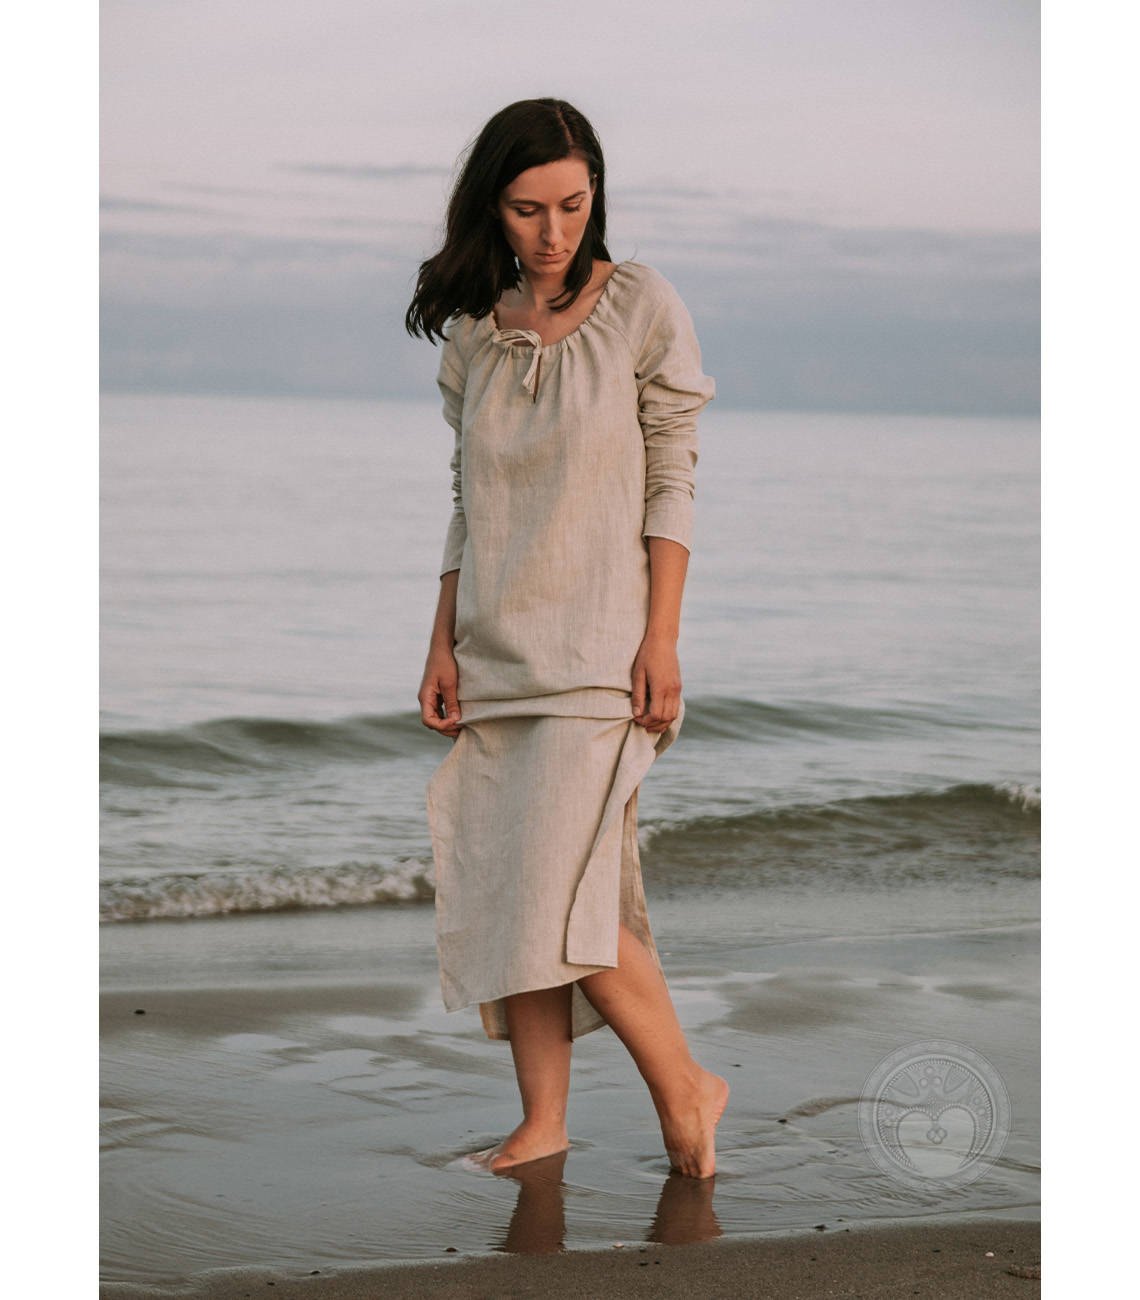 Pskov linen underdress with gathered neckline and cutouts on both sides